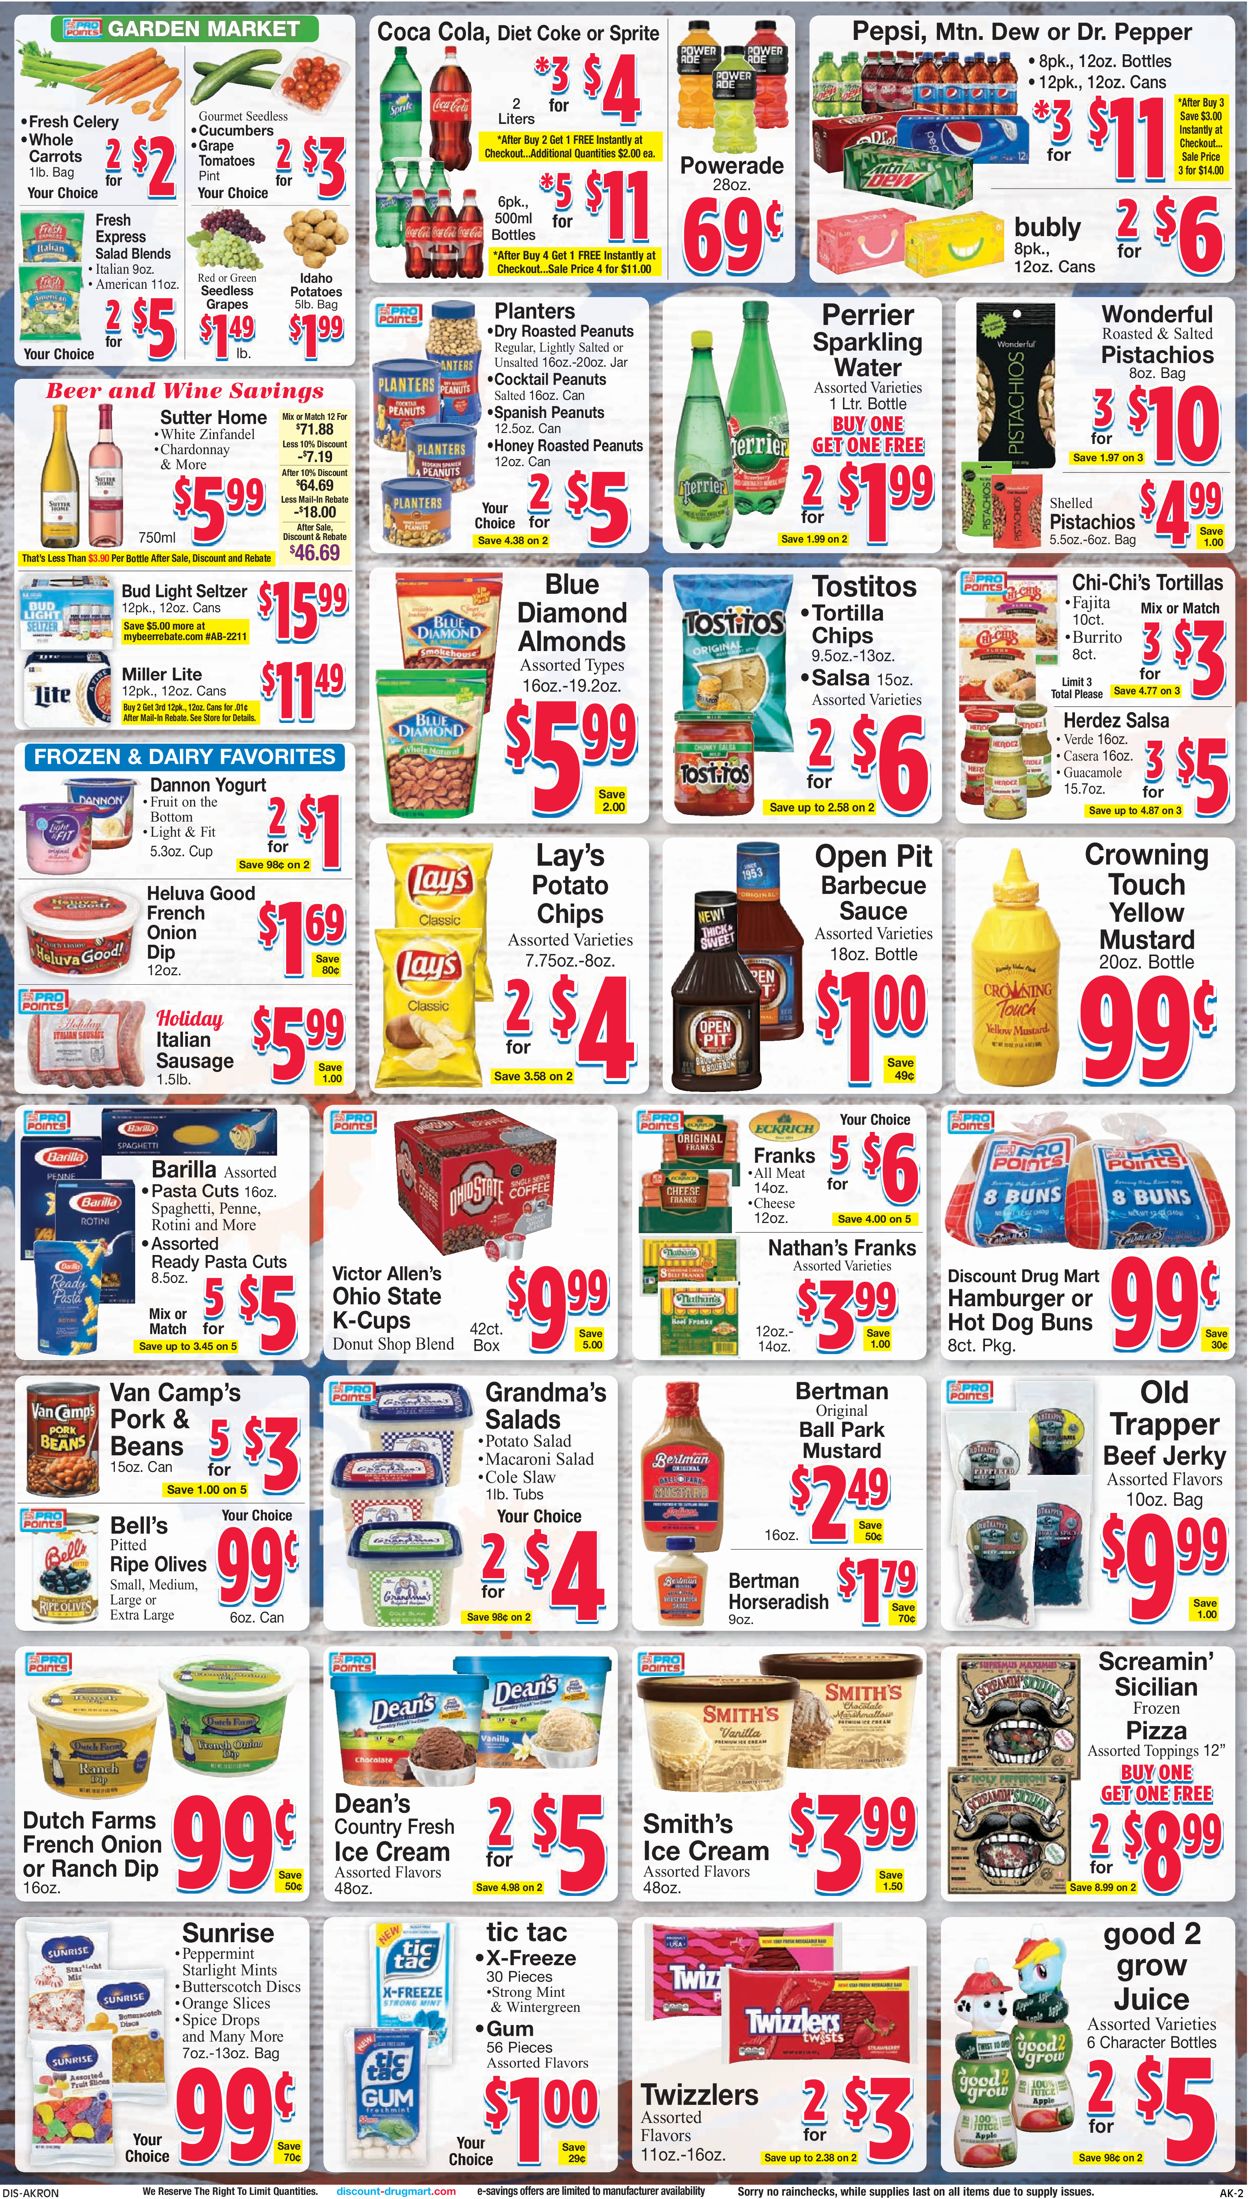 Discount Drug Mart Current weekly ad 09/02 - 09/08/2020 [2] - frequent ...